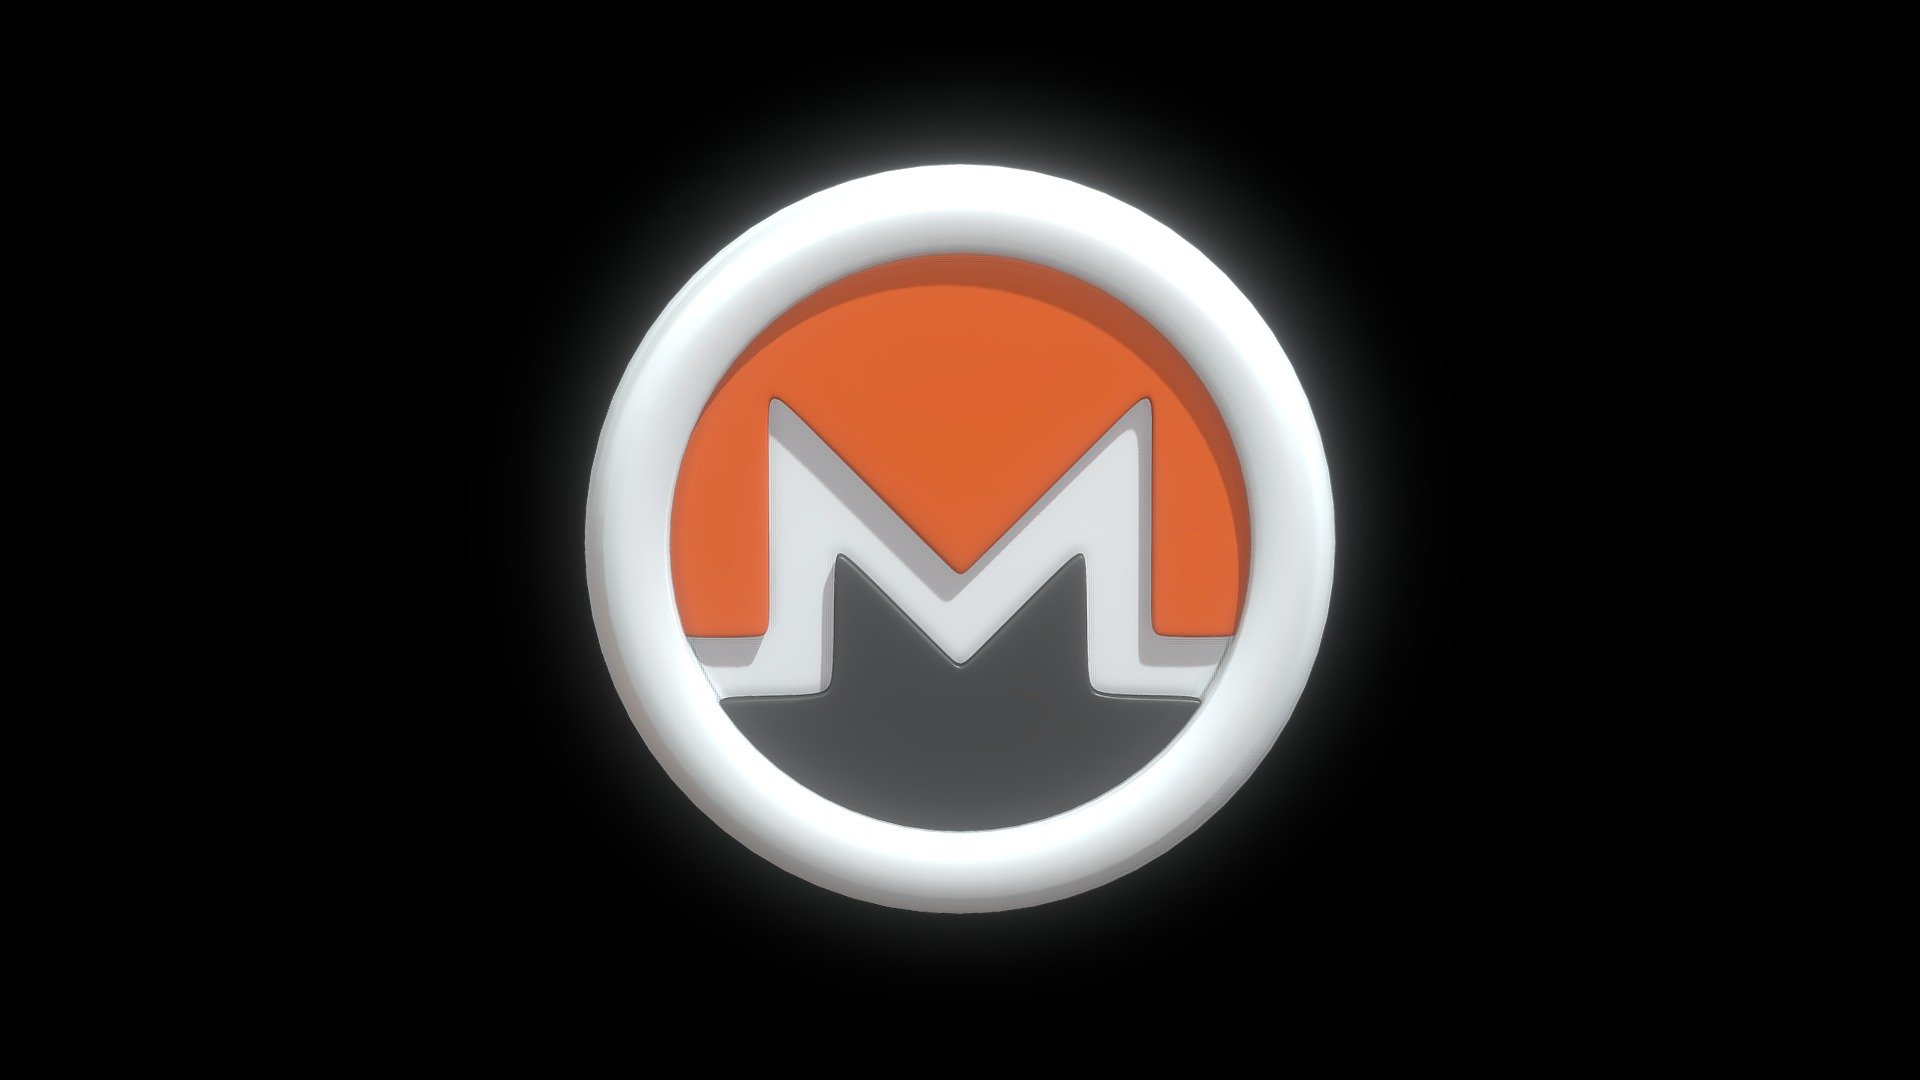 3D Monero or XMR White Crypto Coin with cartoon style Made in Blender 3.3.1

This model does include a TEXTURE, DIFFUSE, METALLIC, AND ROUGHNESS MAP, but if you want to change the color you can change it in the blend file, just use the principled bsdf and play with the Roughness, Metallic, and Base Color parameter 3d model